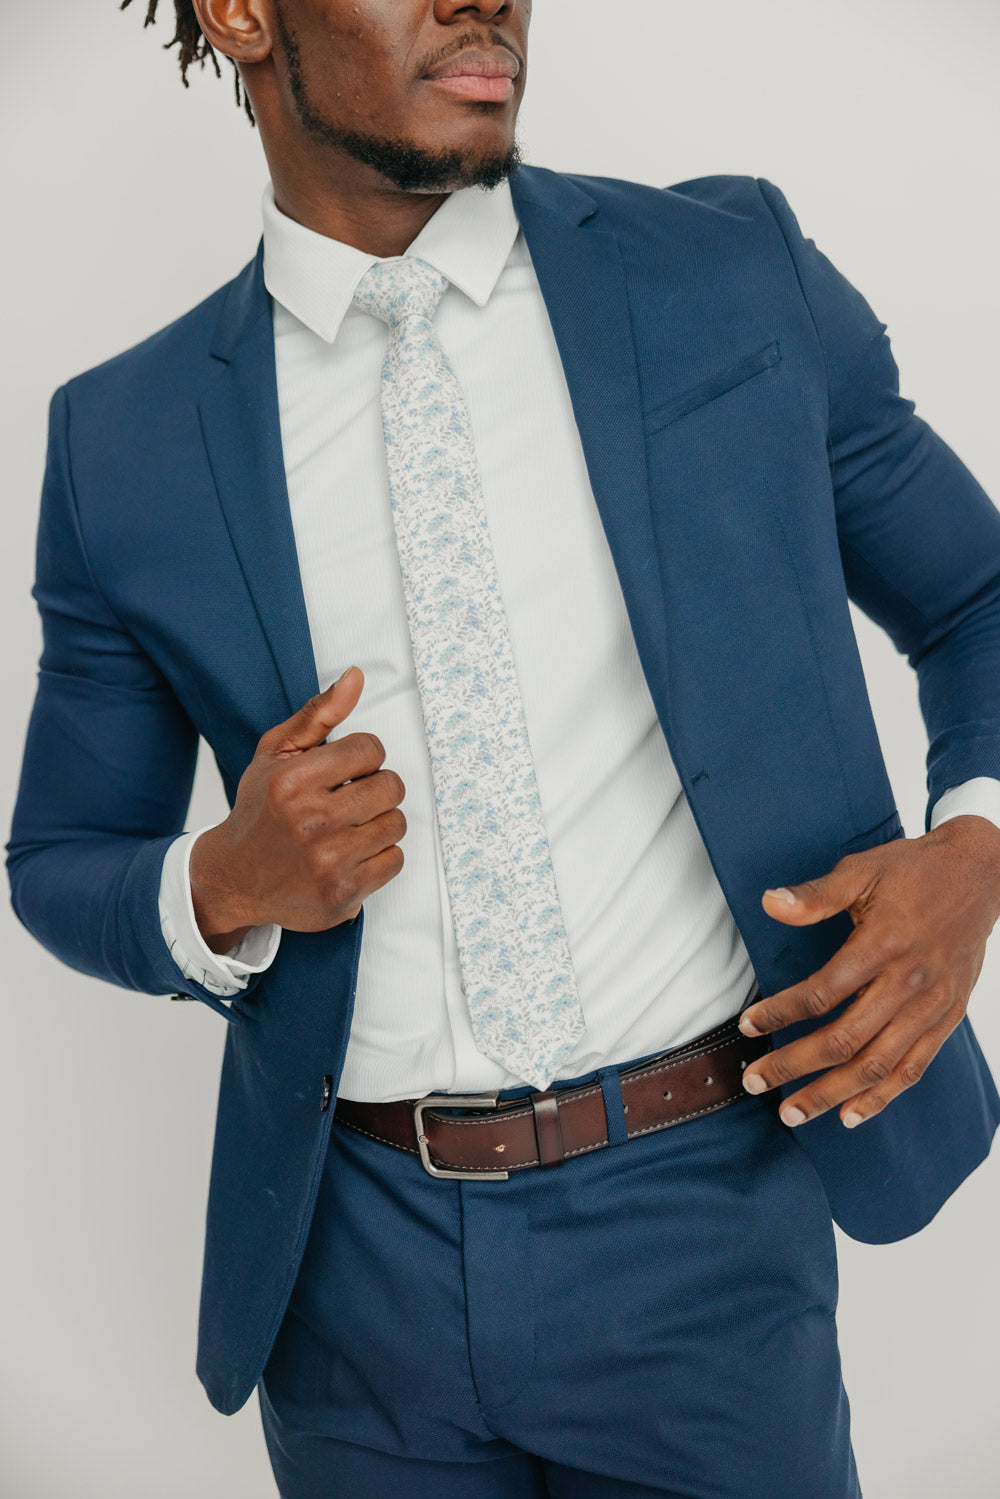 Bluebell tie worn with a white shirt, brown belt and blue suit.